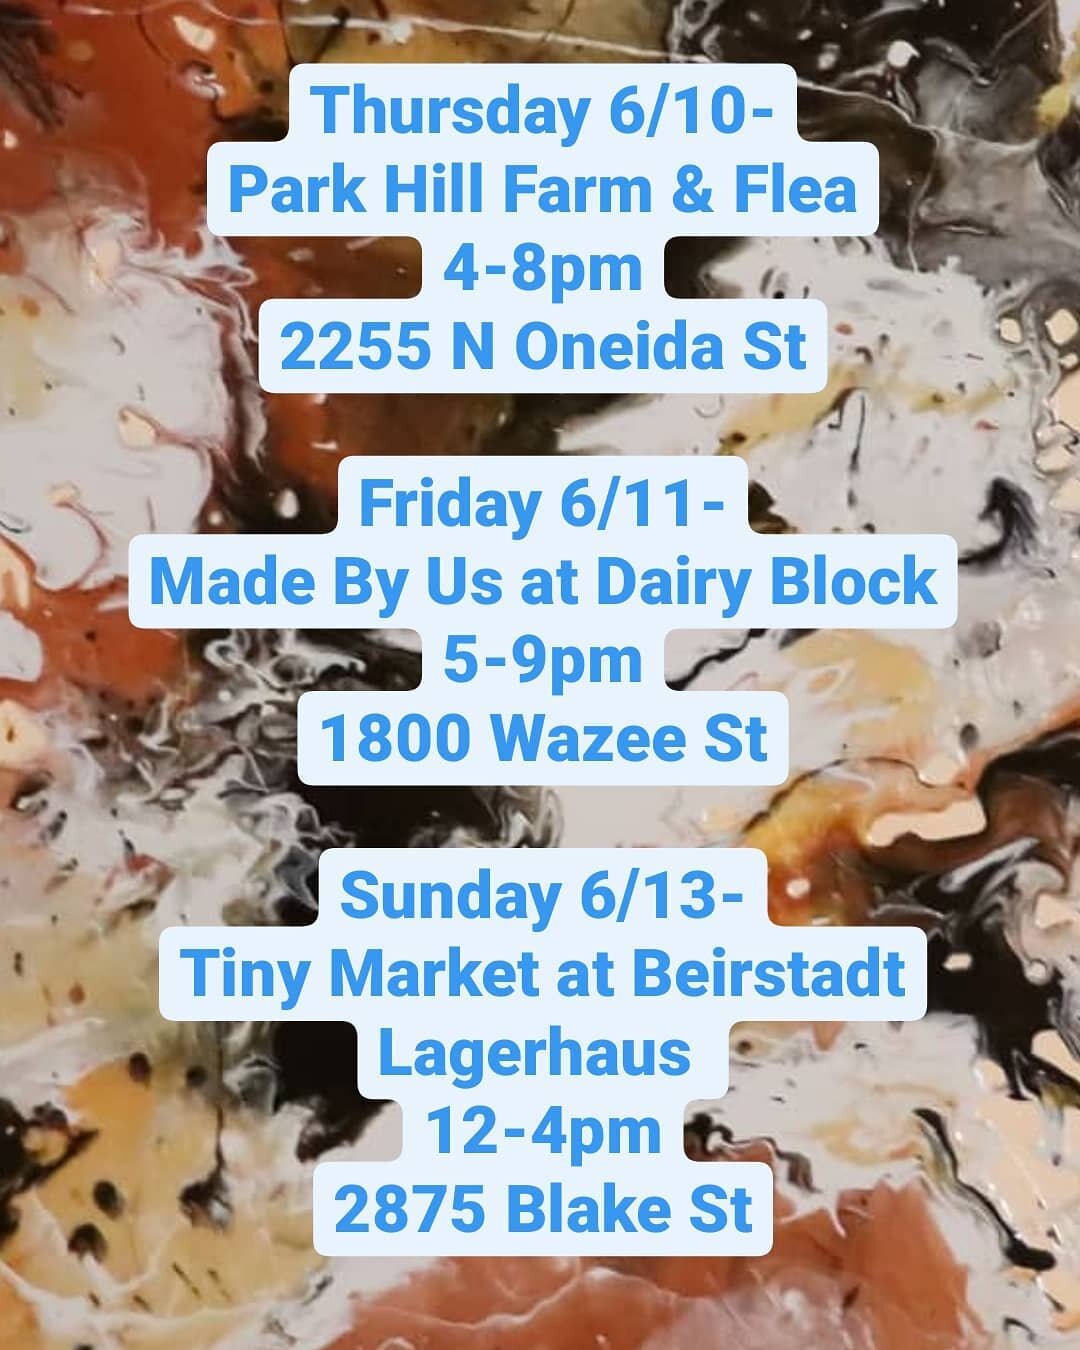 This week's pop up schedule! The weather should be nice and warm 🌞 See you there!

#localartist #denverartist #denverlocalbusiness #supportsmallbusiness #abstractart #popupmarket #pourpainting #shoplocal #shopsmall